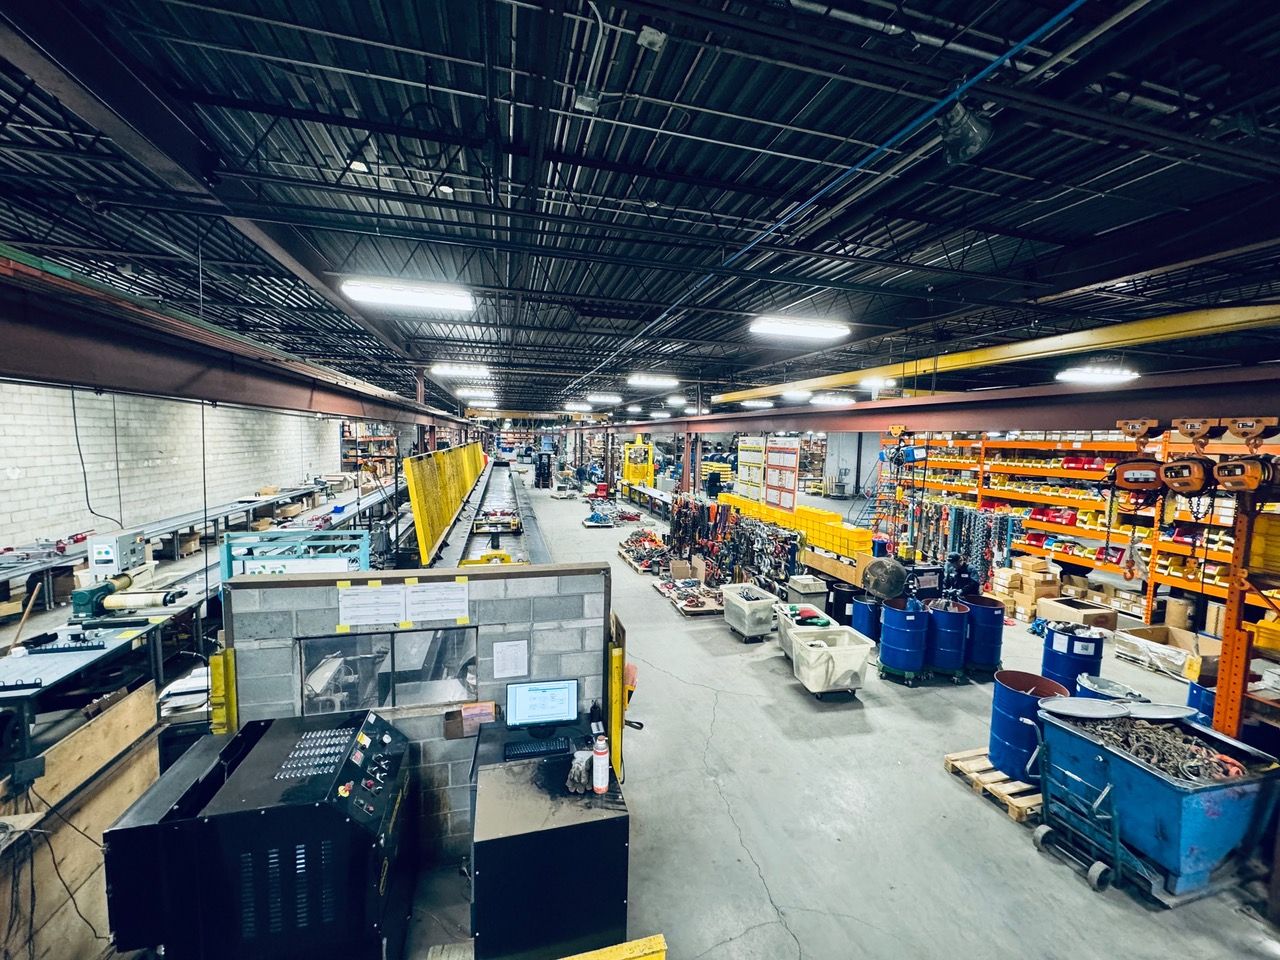 Unirope has added 50,000 square feet of manufacturing space to its headquarters in Mississauga, Ontario.